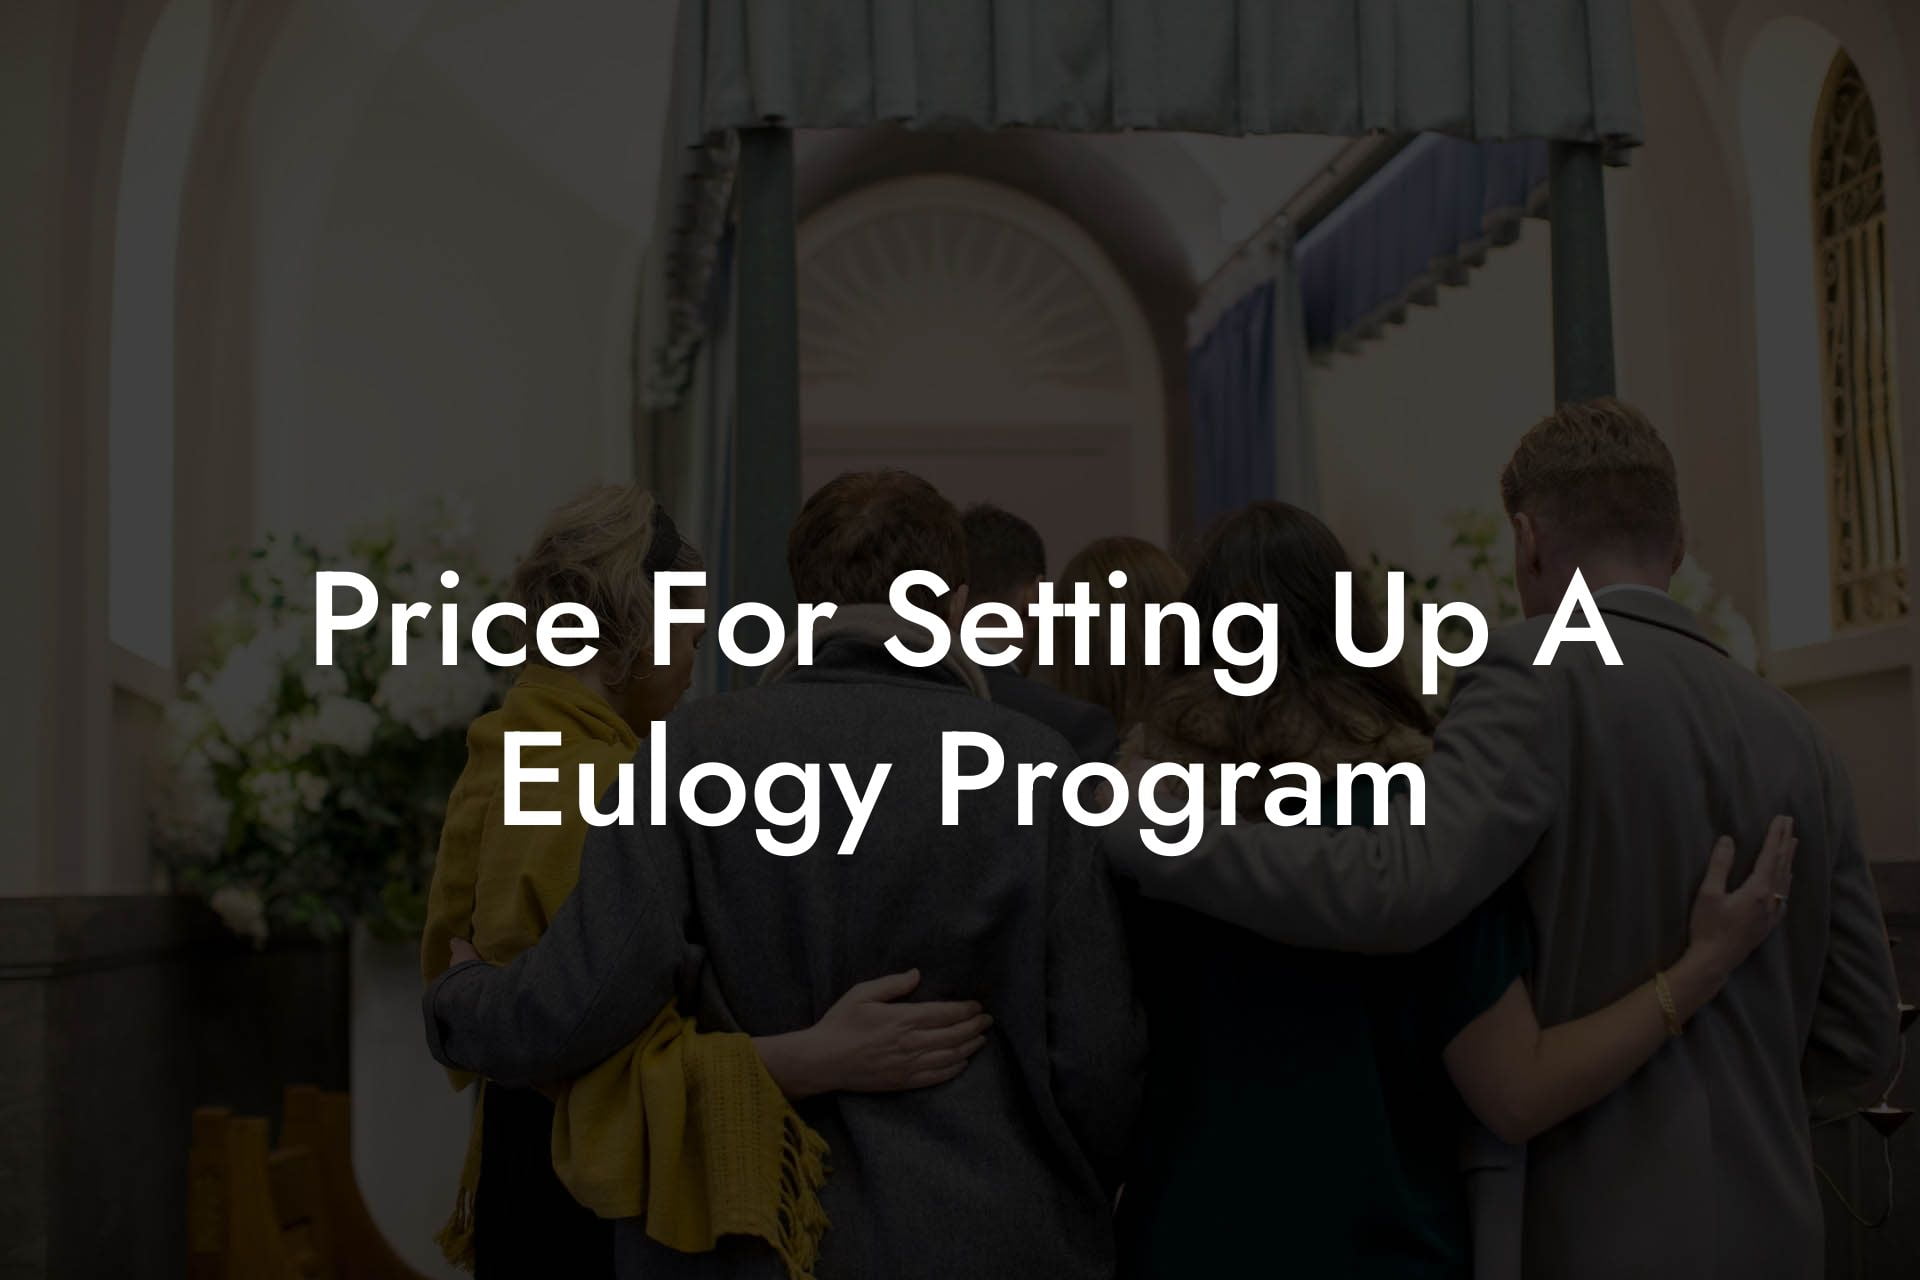 Price For Setting Up A Eulogy Program